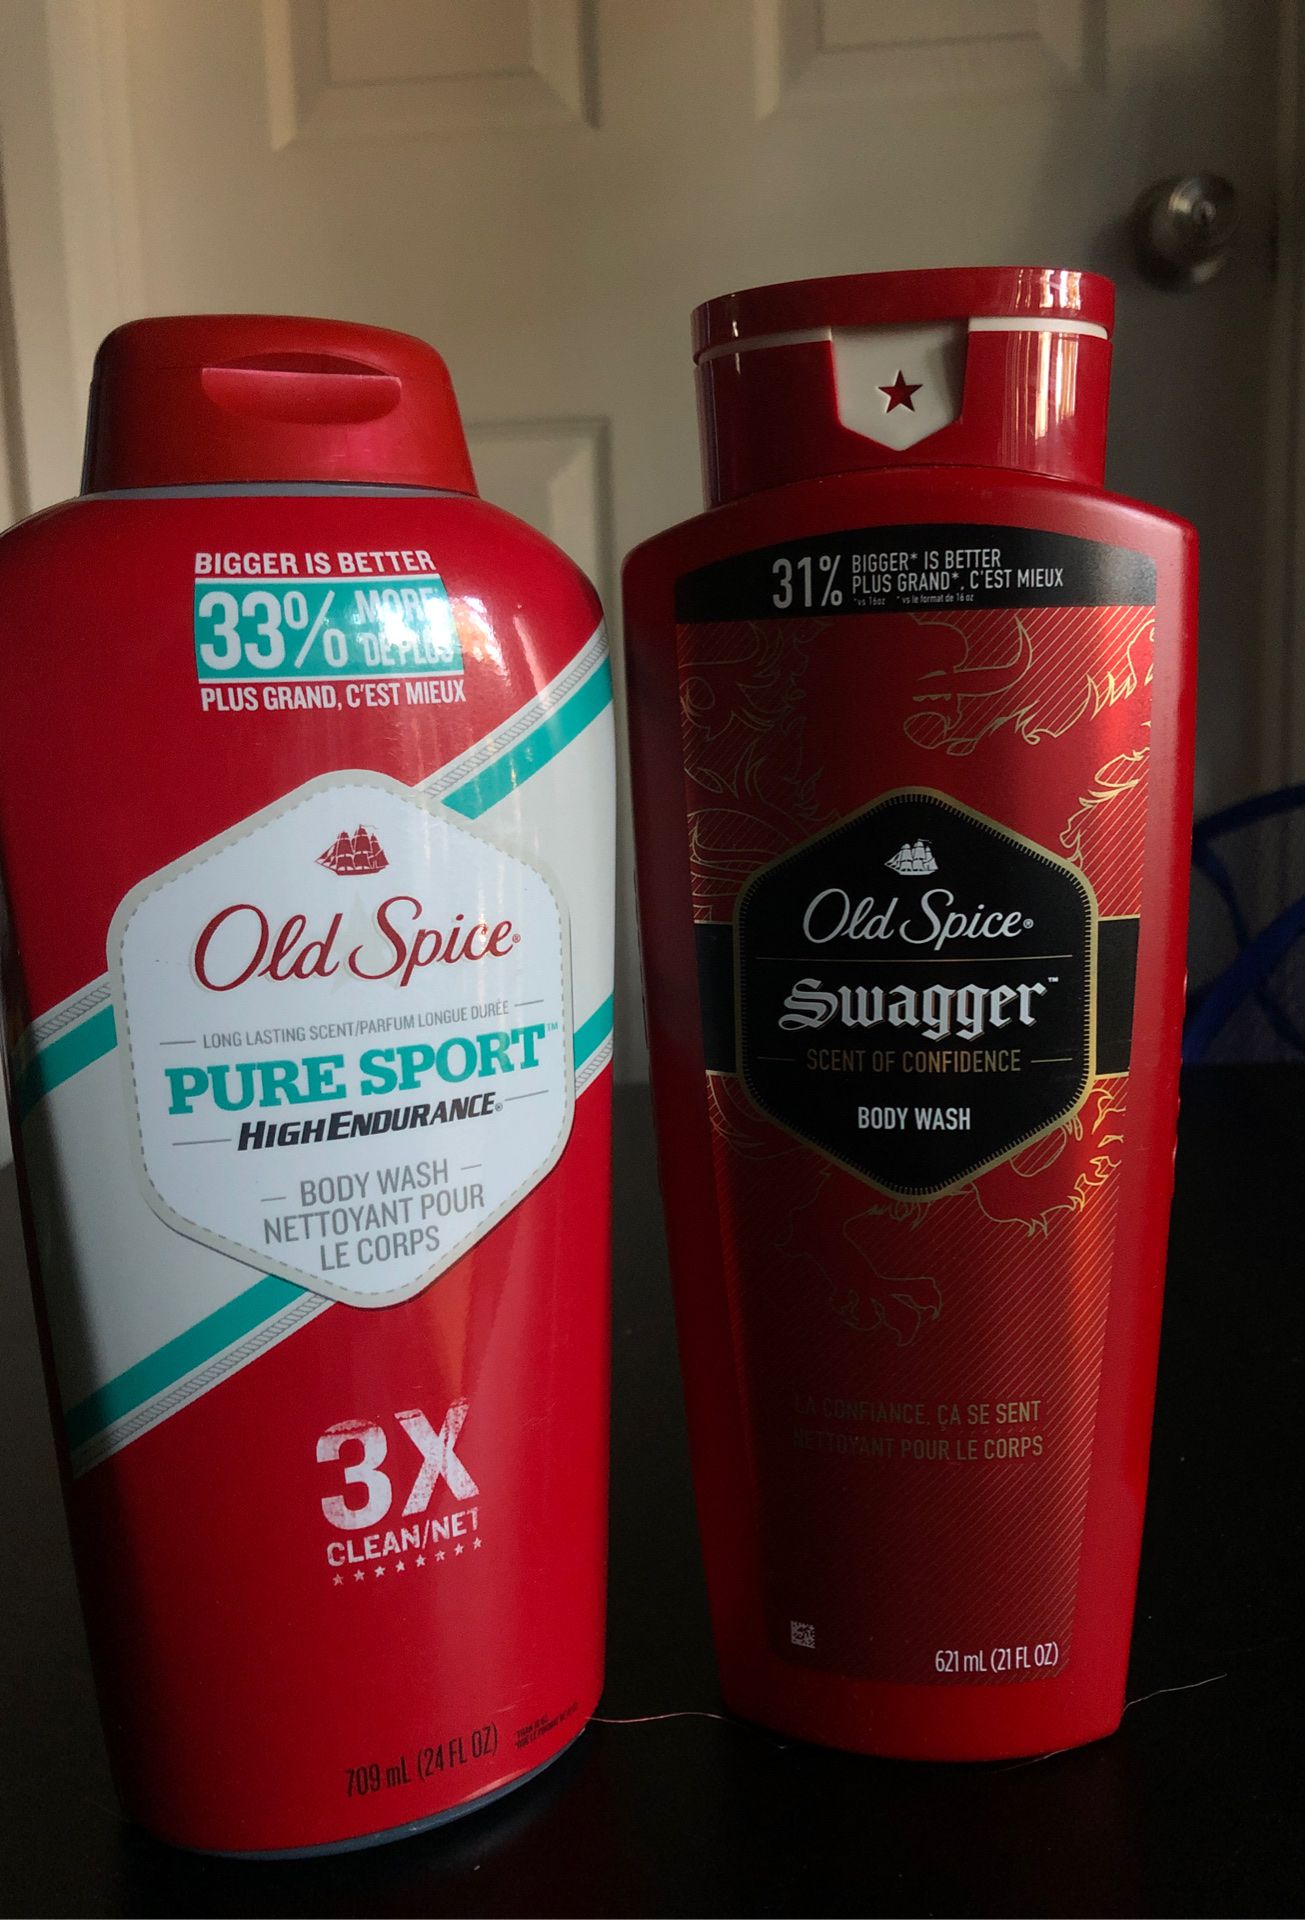 Two brand new old spice body wash